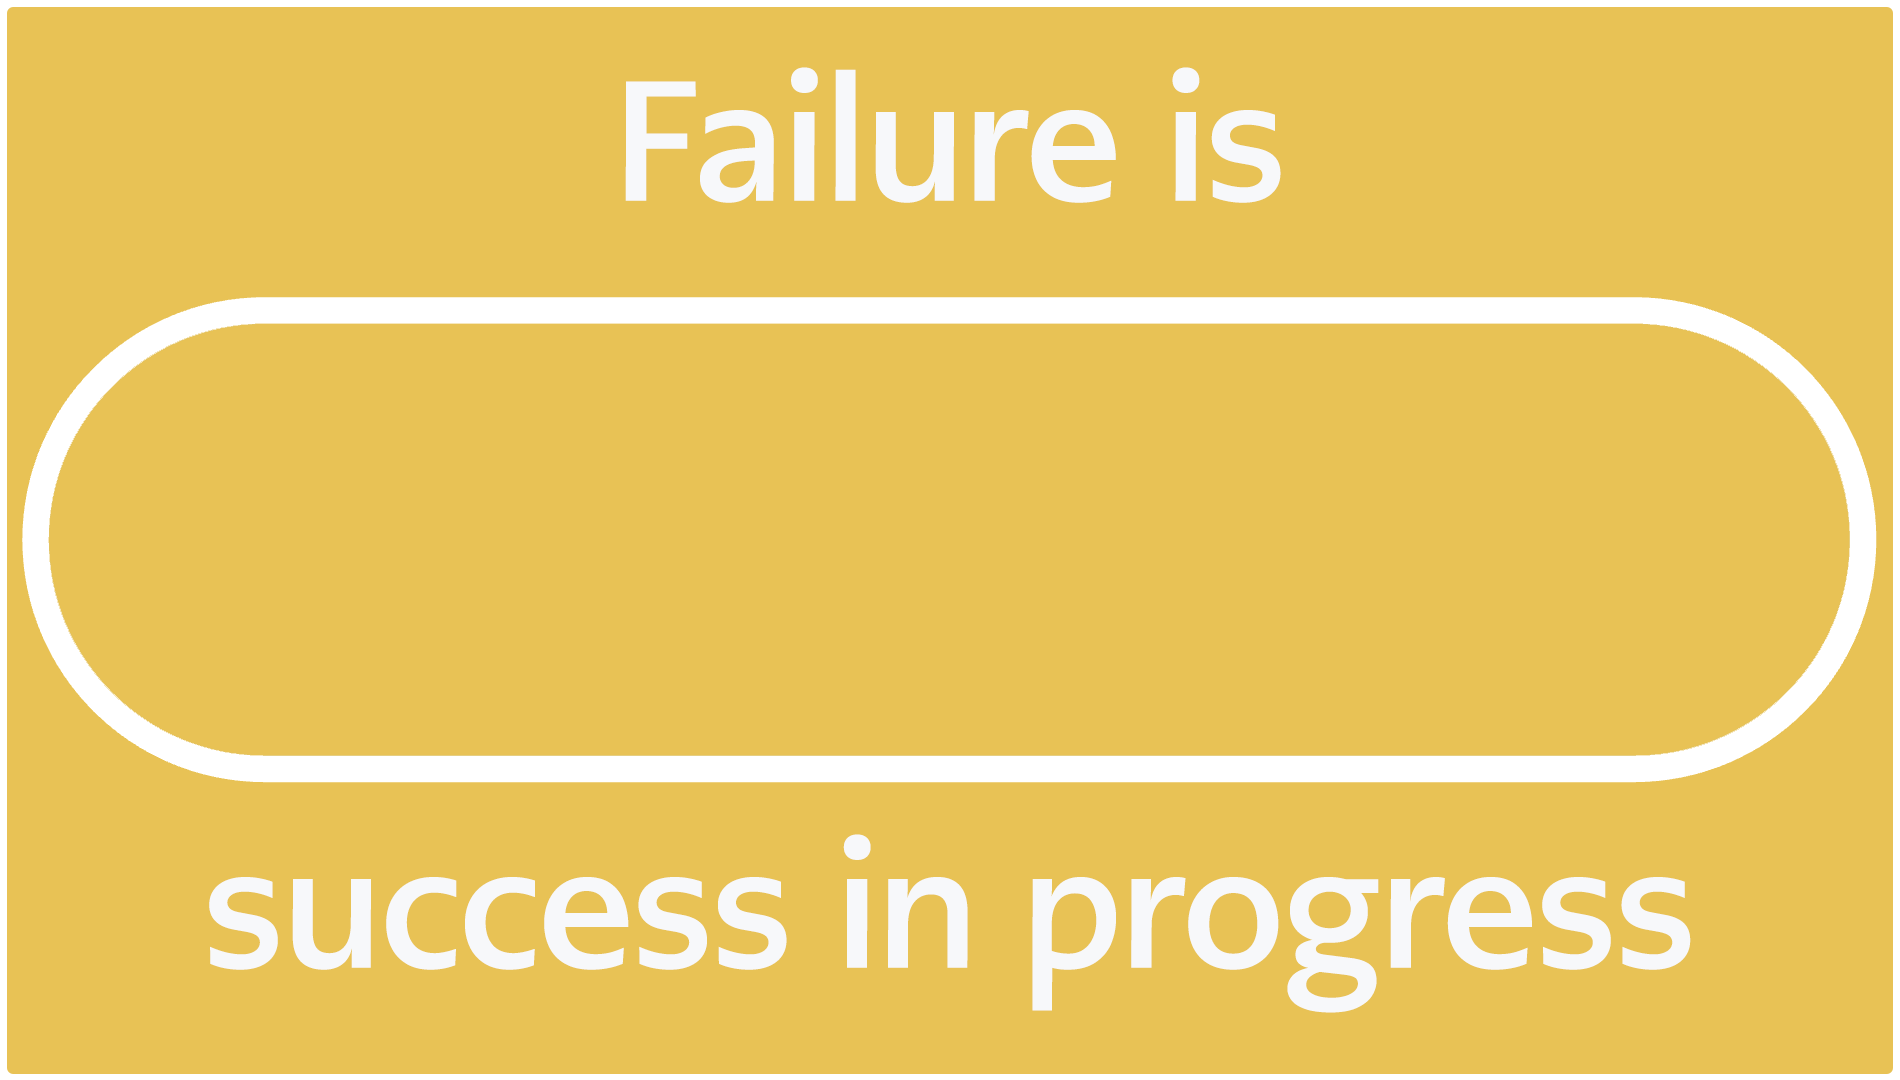 Progress bar gif with text "Failure is success in progress"